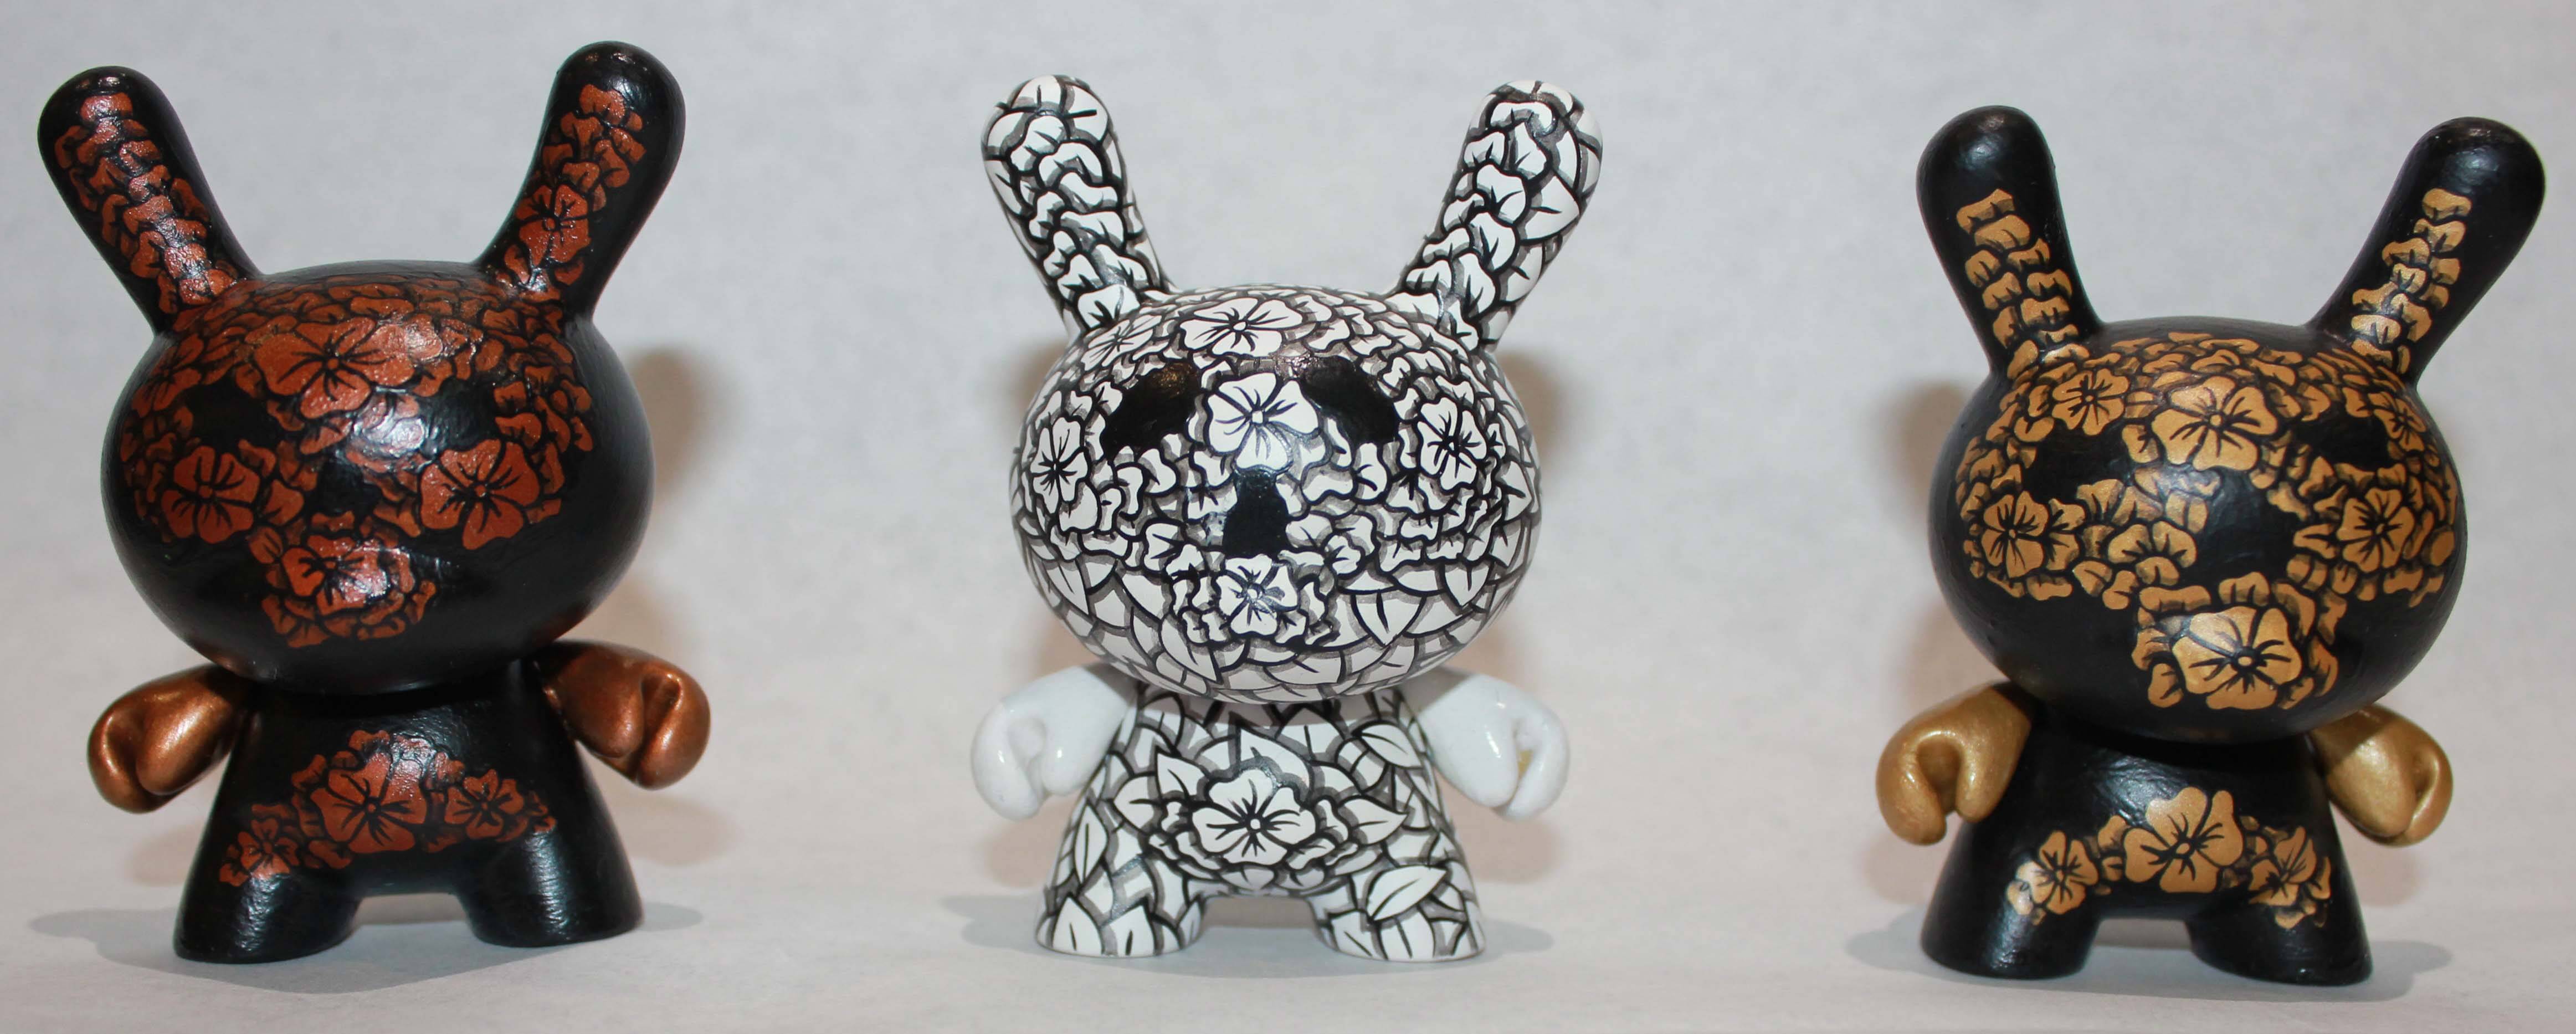 dunny3